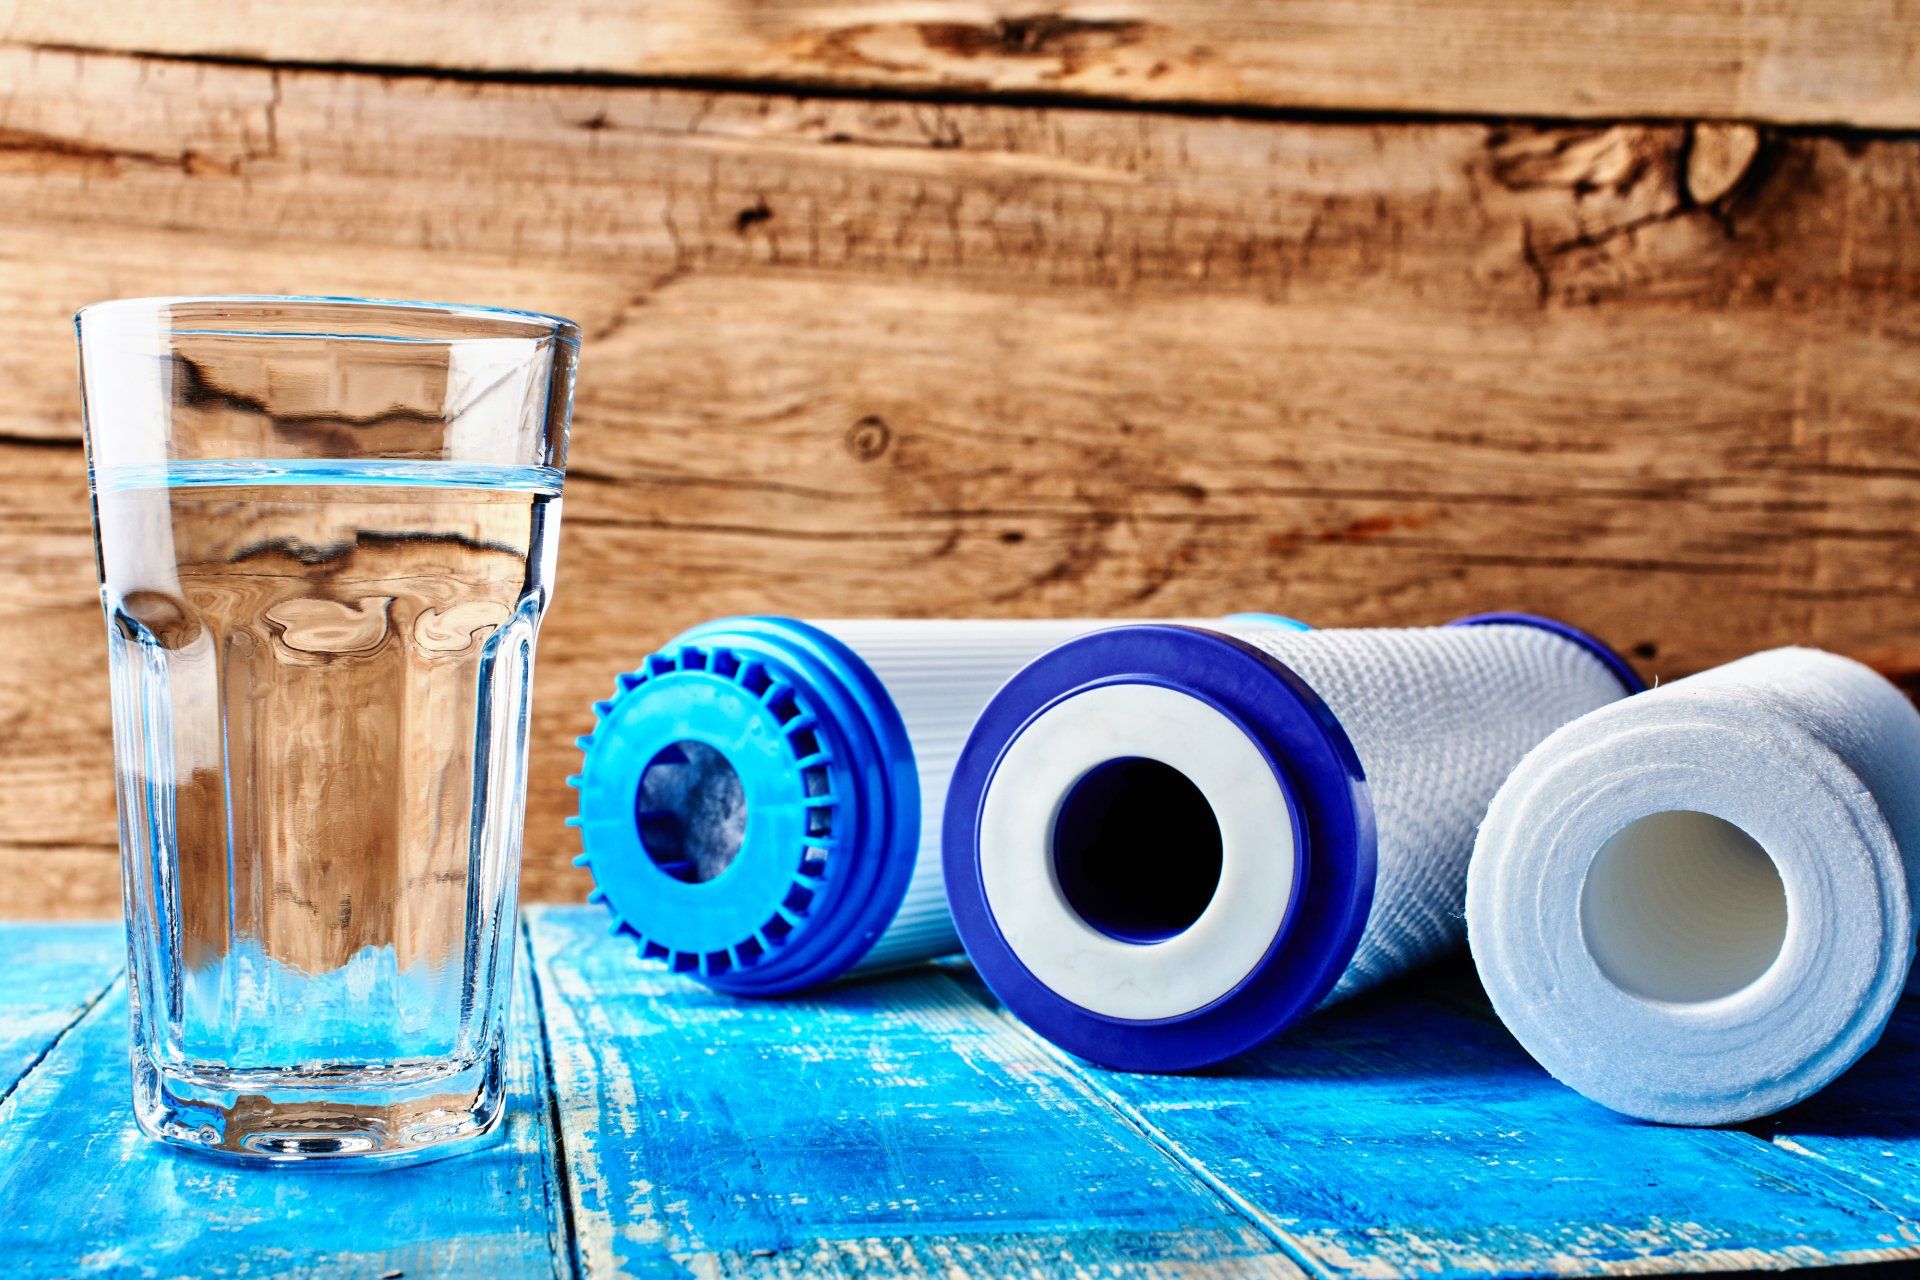 Water filters. Carbon cartridges and a glass of water on a wooden background.